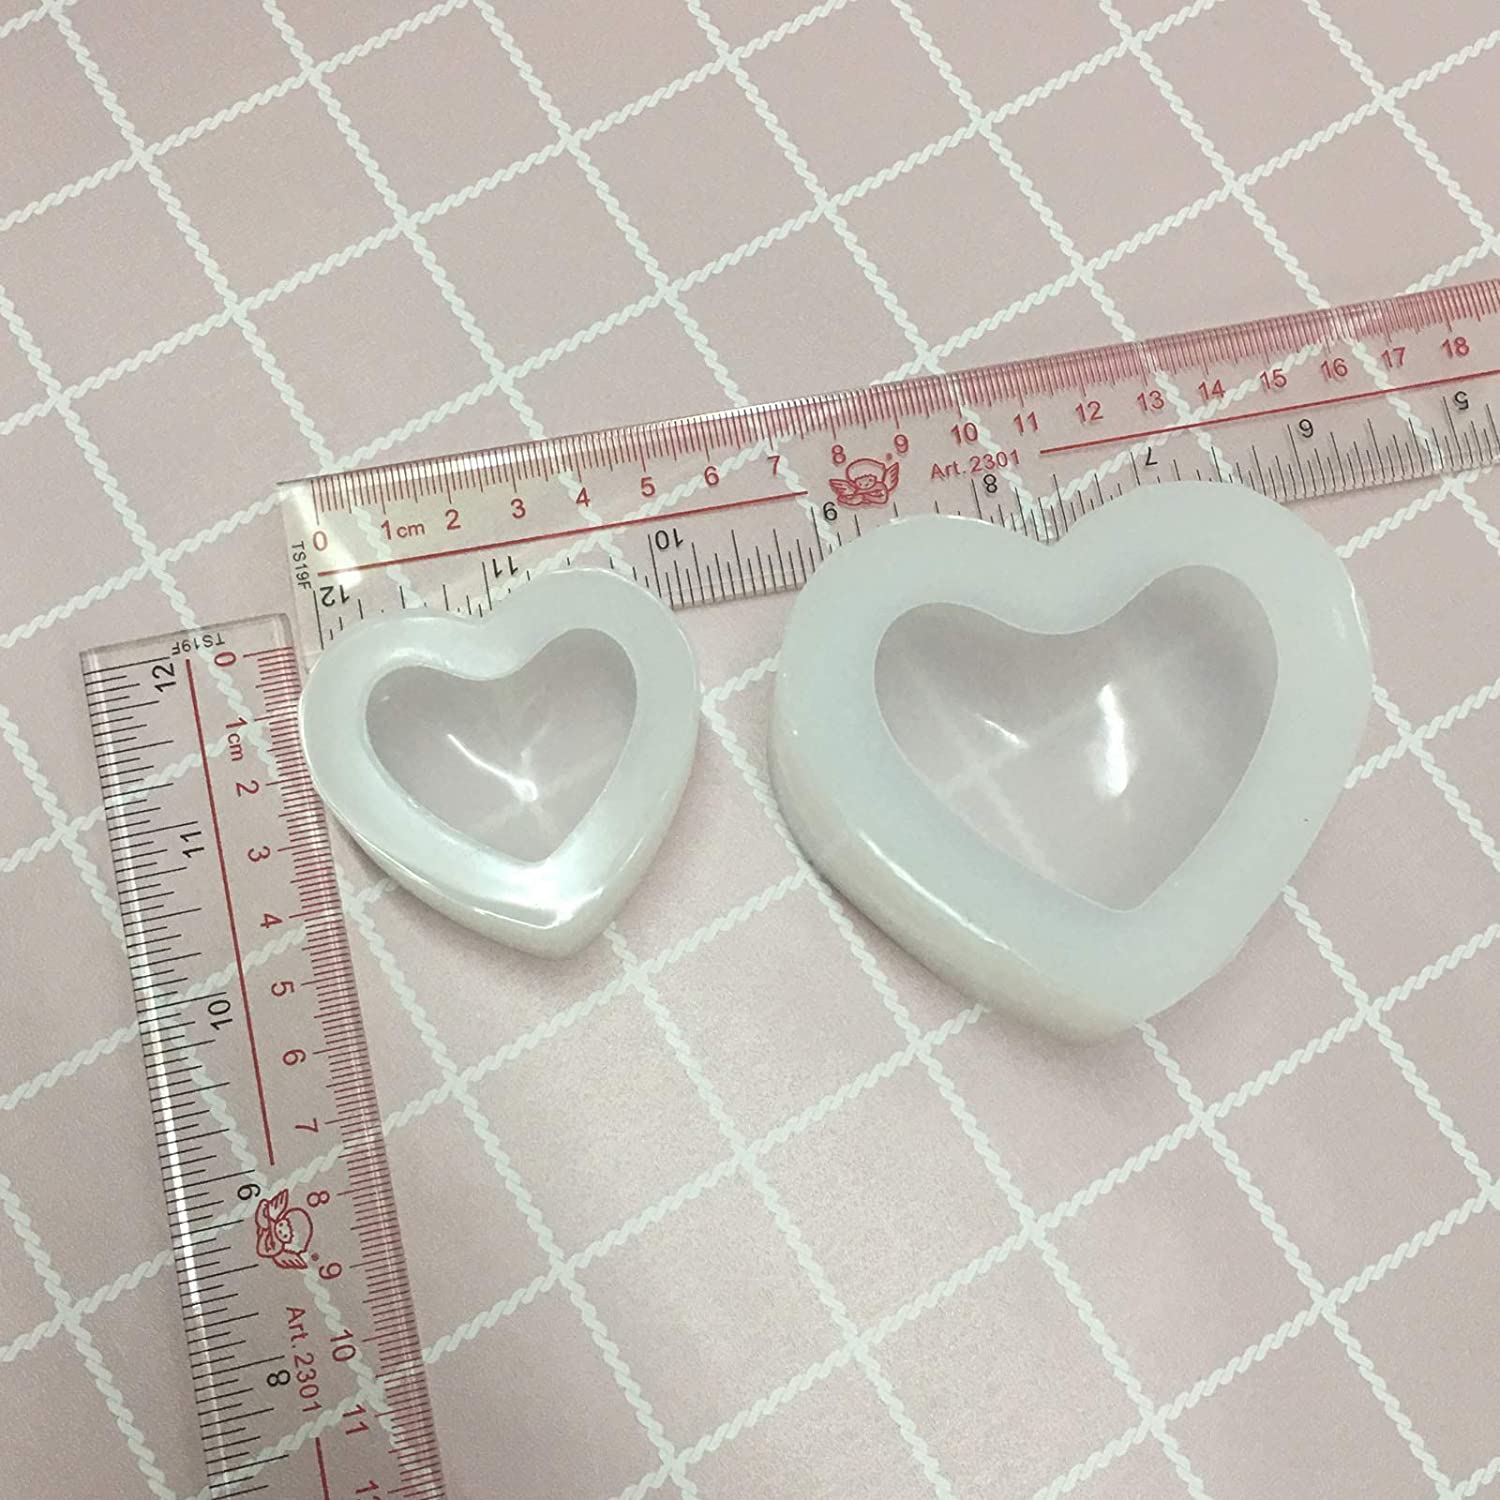 3D heart-shaped Silicone Mold DIY Fondant Chocolate Dry Pez Mold High  Mirror Resin Jewelry Mold - Price history & Review, AliExpress Seller -  Aogue Store